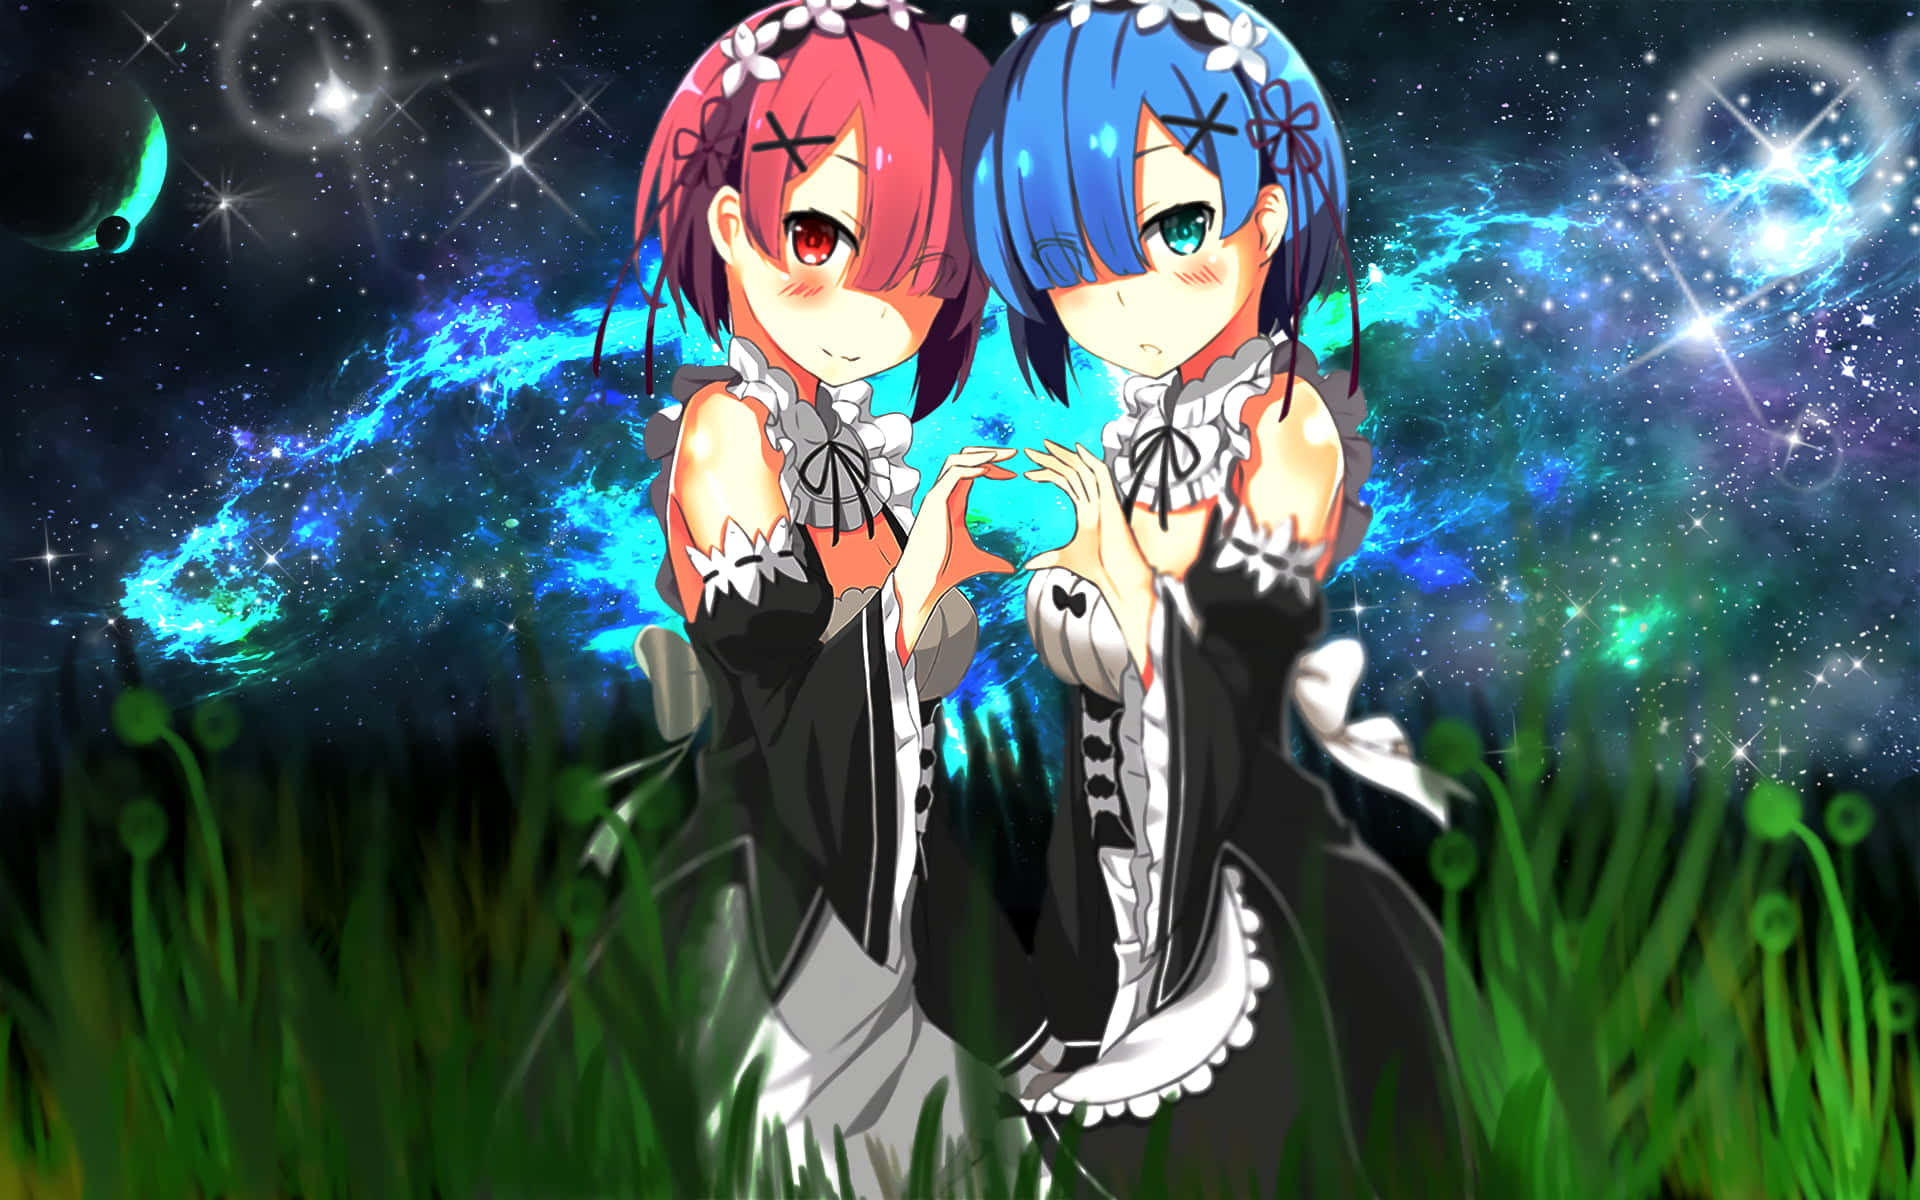 Two Anime Girls In A Field With Stars In The Background Wallpaper